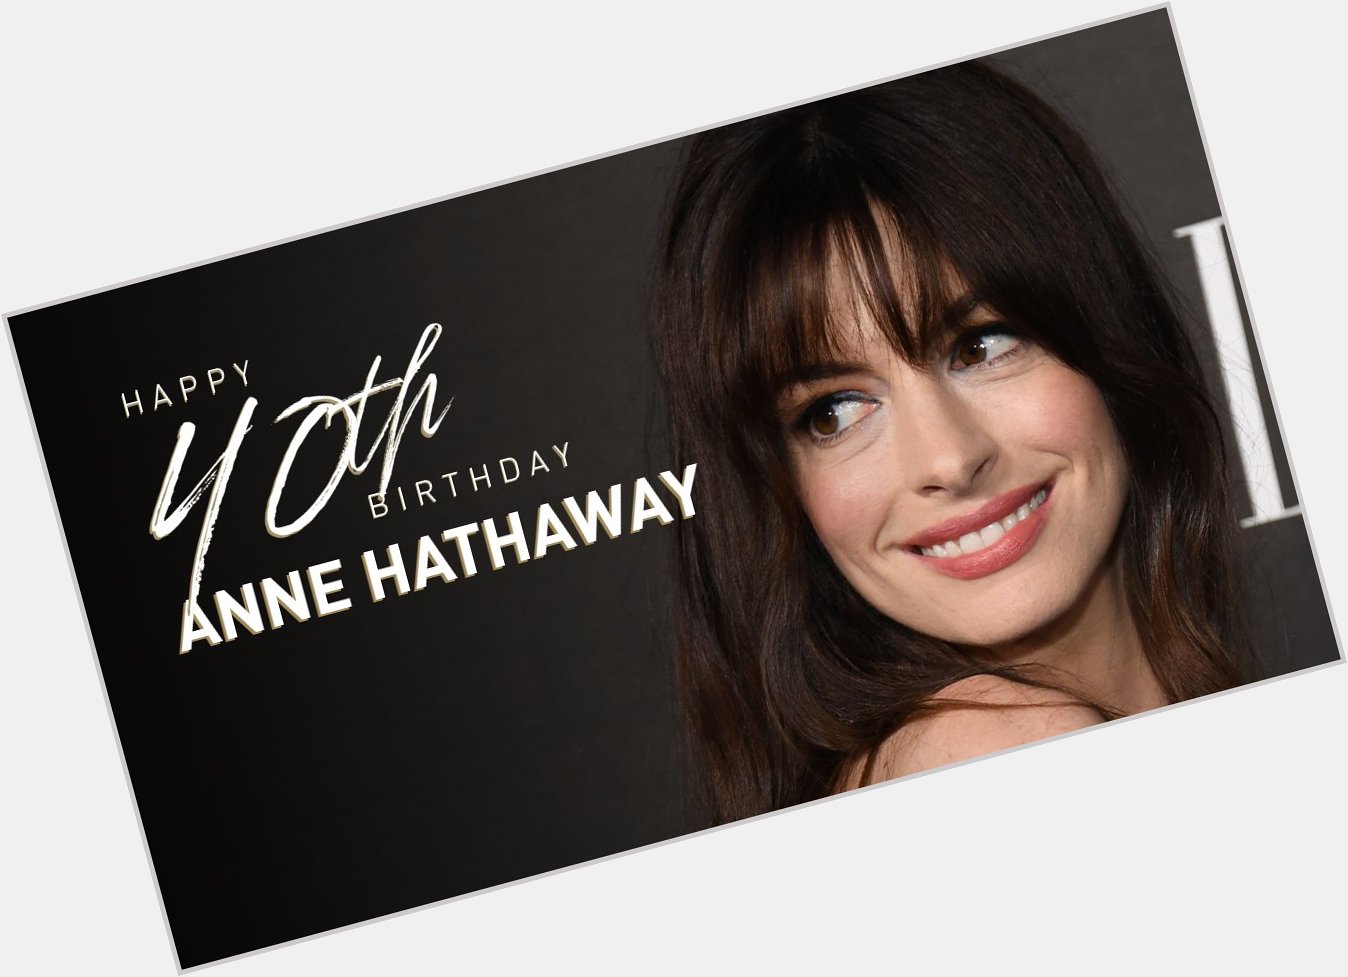 Happy 40th birthday to the incredible Actress Anne Hathaway!

Read her bio here:  